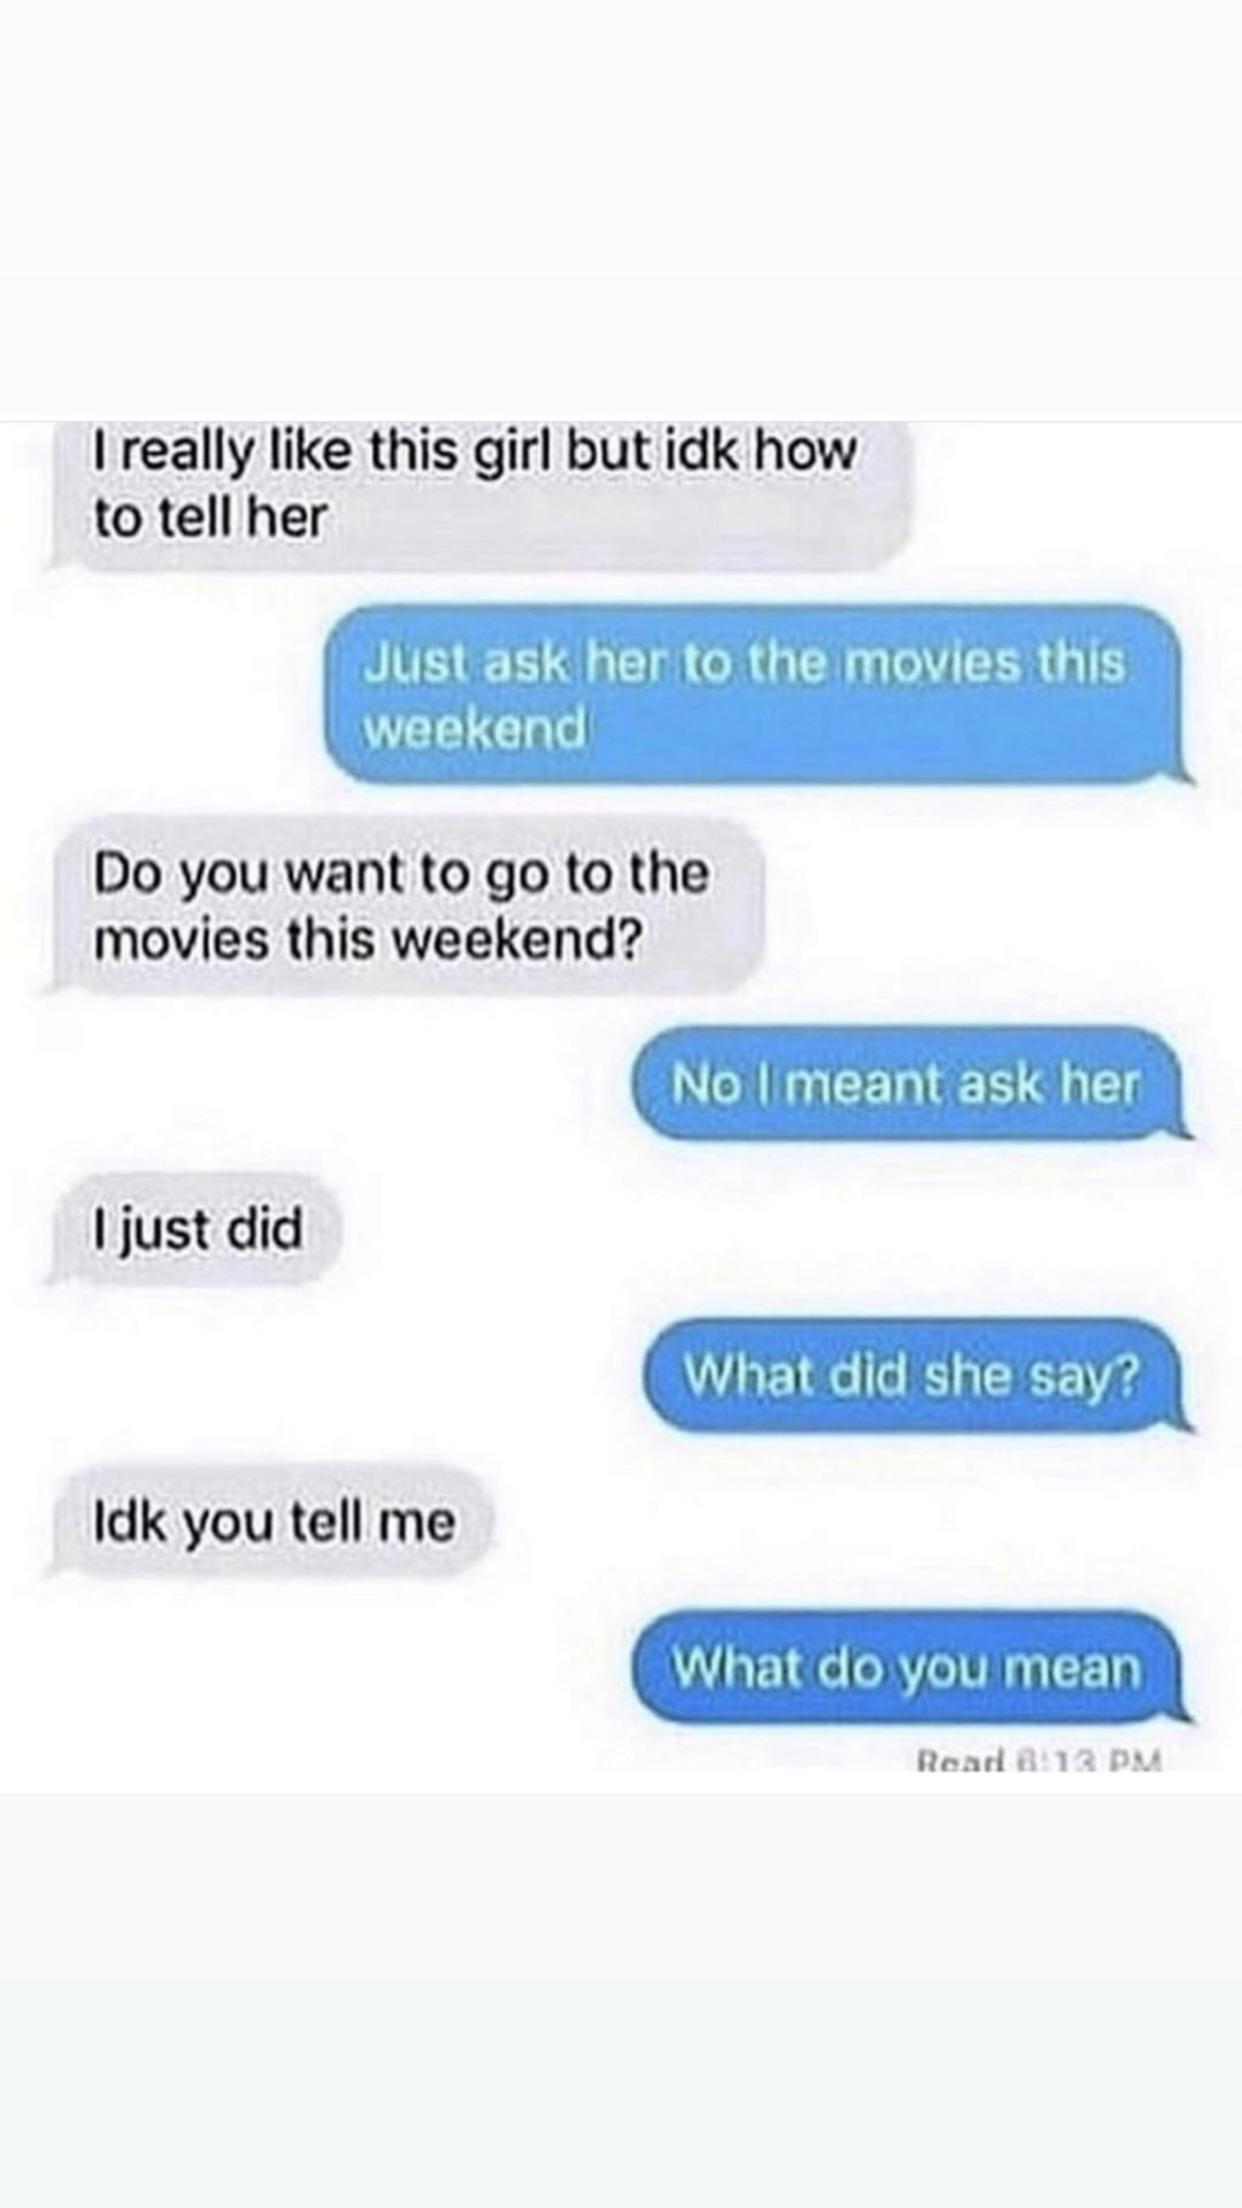 dating advice texts - I really this girl but idk how to tell her Just ask her to the movies this weekend Do you want to go to the movies this weekend? No I meant ask her I just did What did she say? Idk you tell me What do you mean Roar B13 Pm